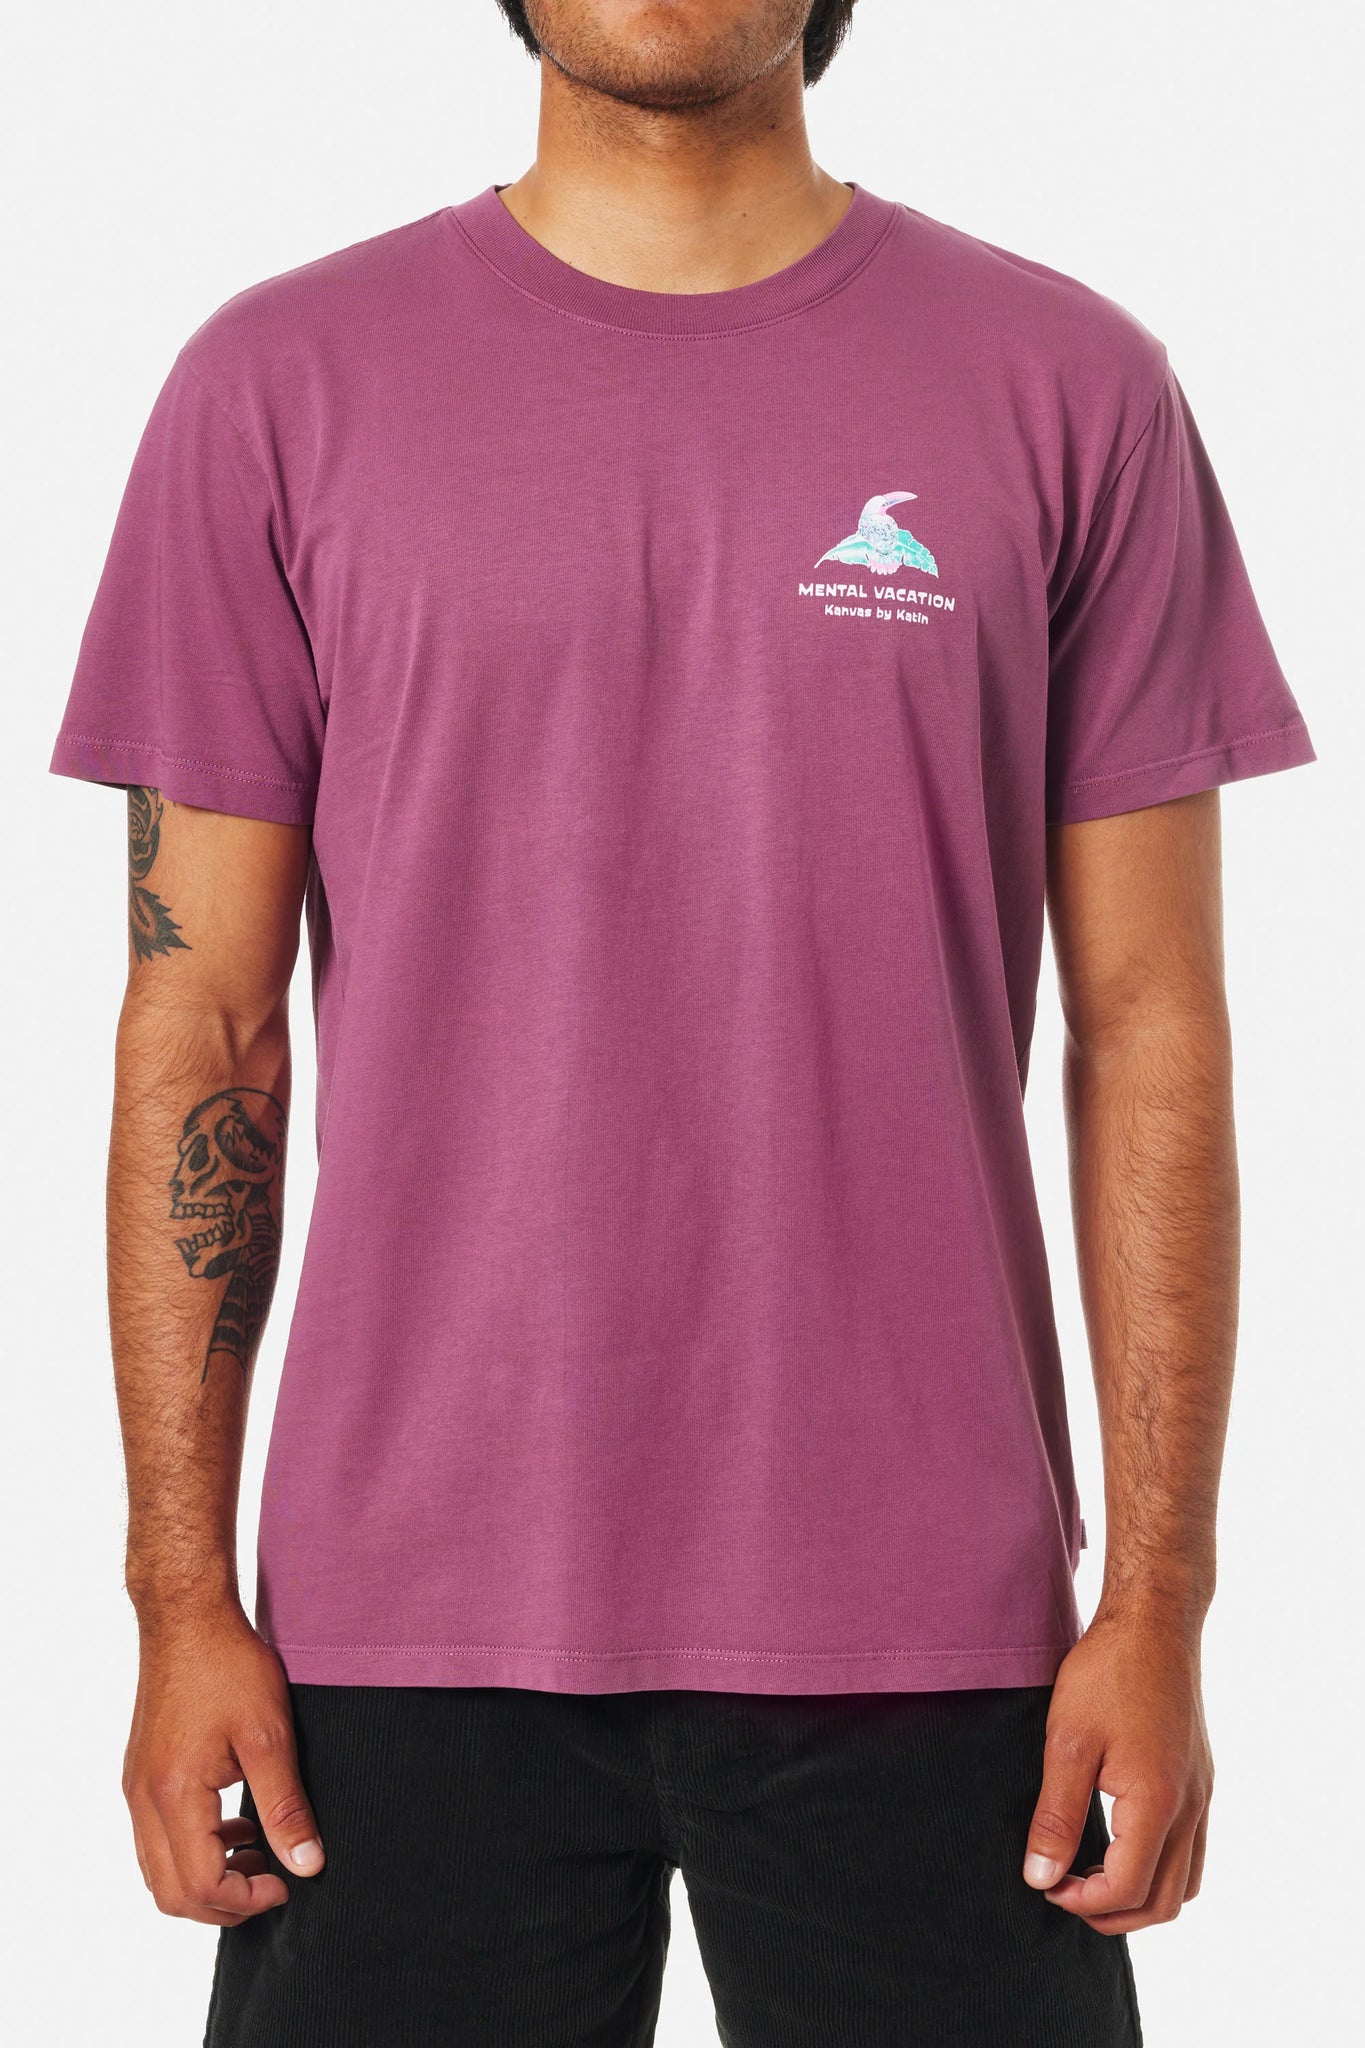 Katin USA - Paradise Birds Tee - all things being eco chilliwack canada - men's clothing and accessories store - shop online or instore